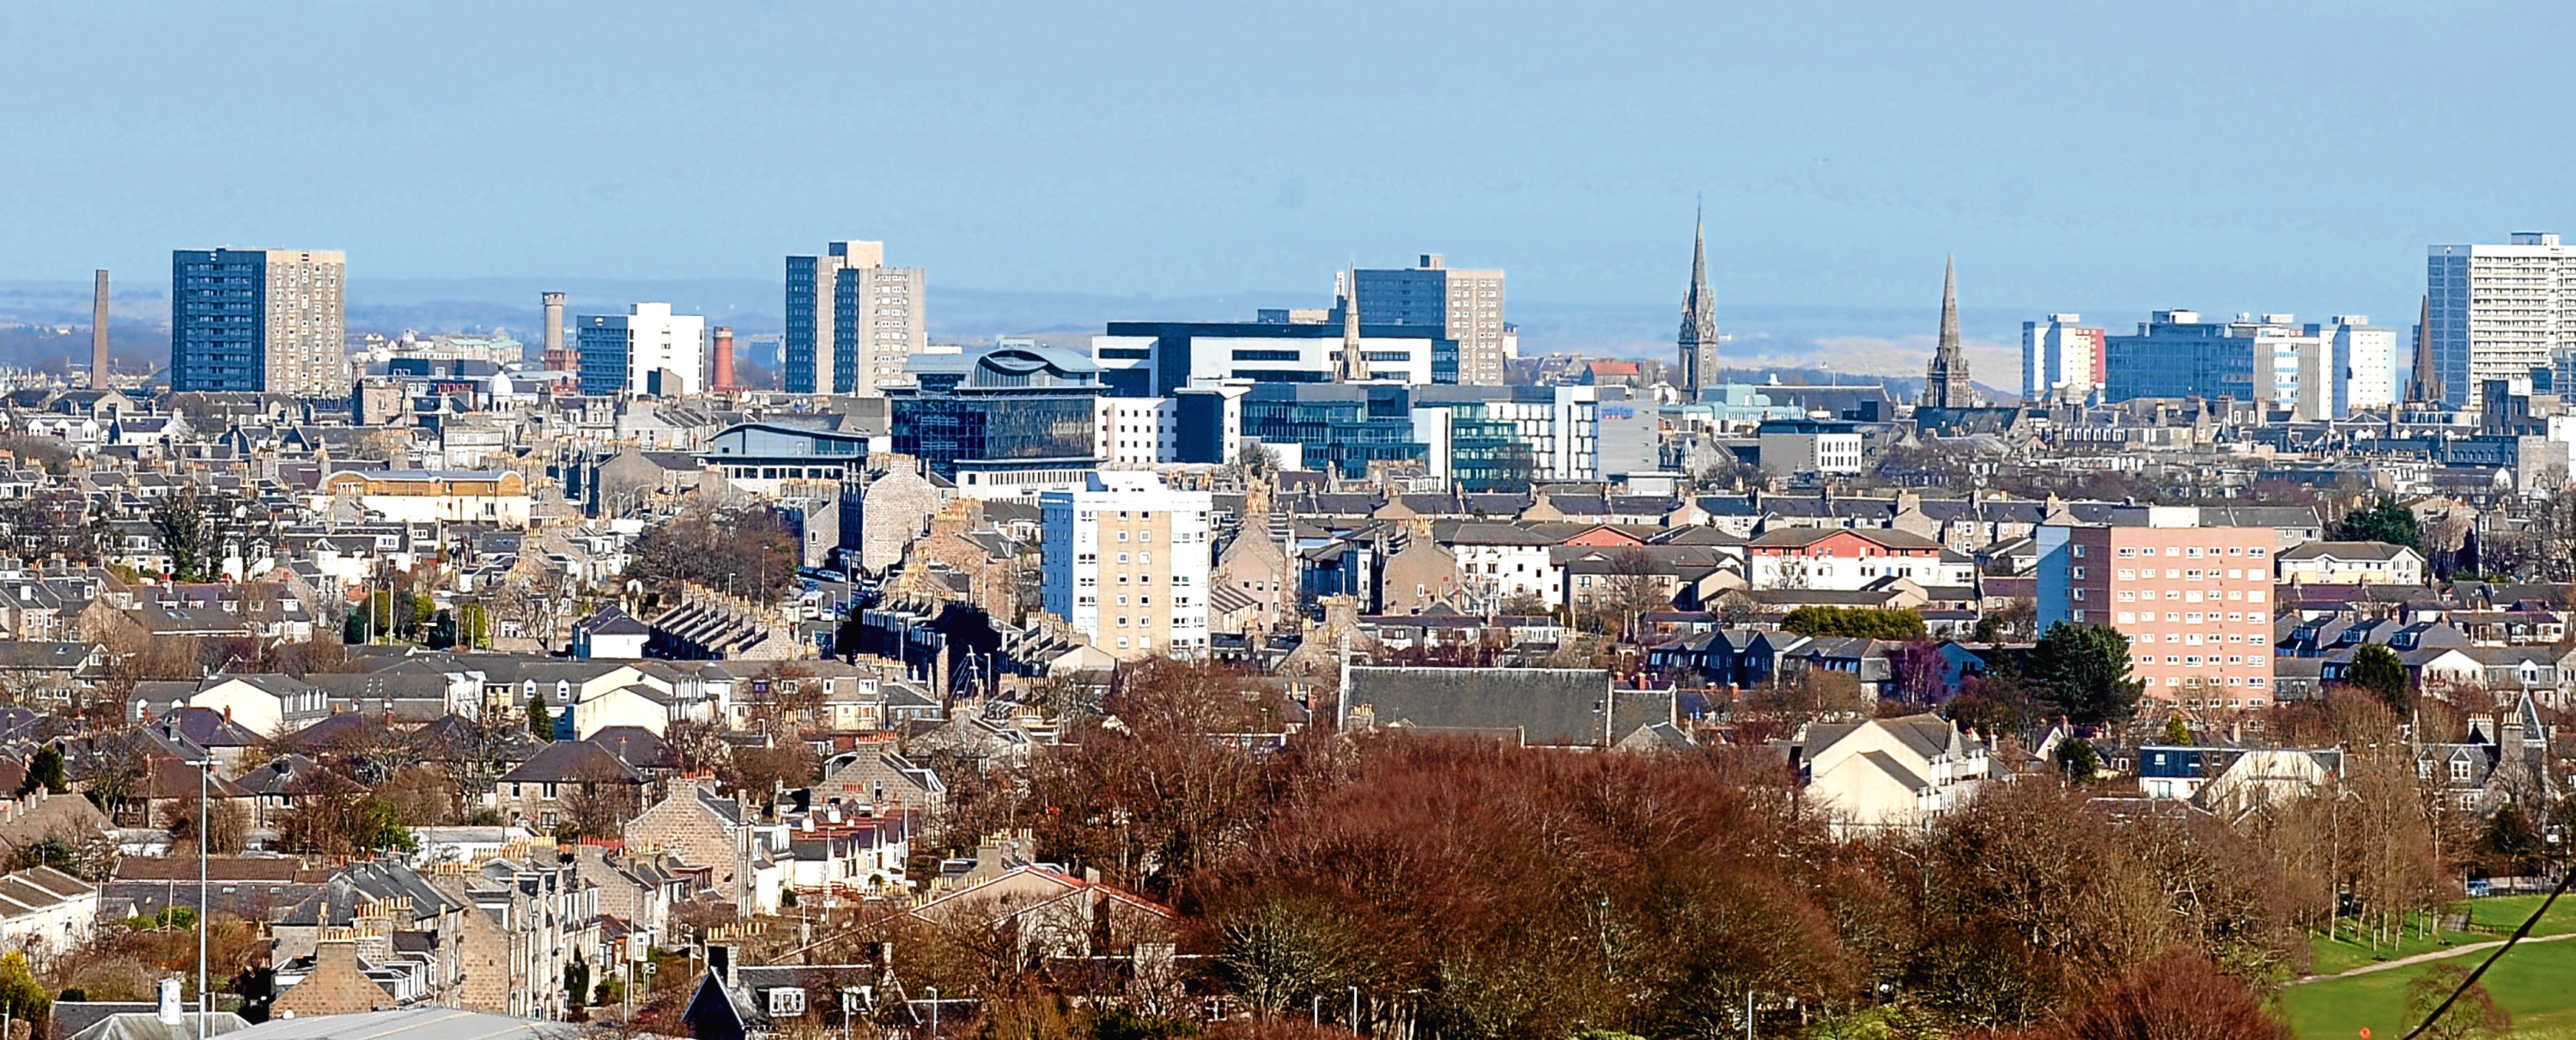 Stock - Aberdeen cityscape city scape view - looking from Bridge of Dee towards the city centre.

Picture by Simon Walton.